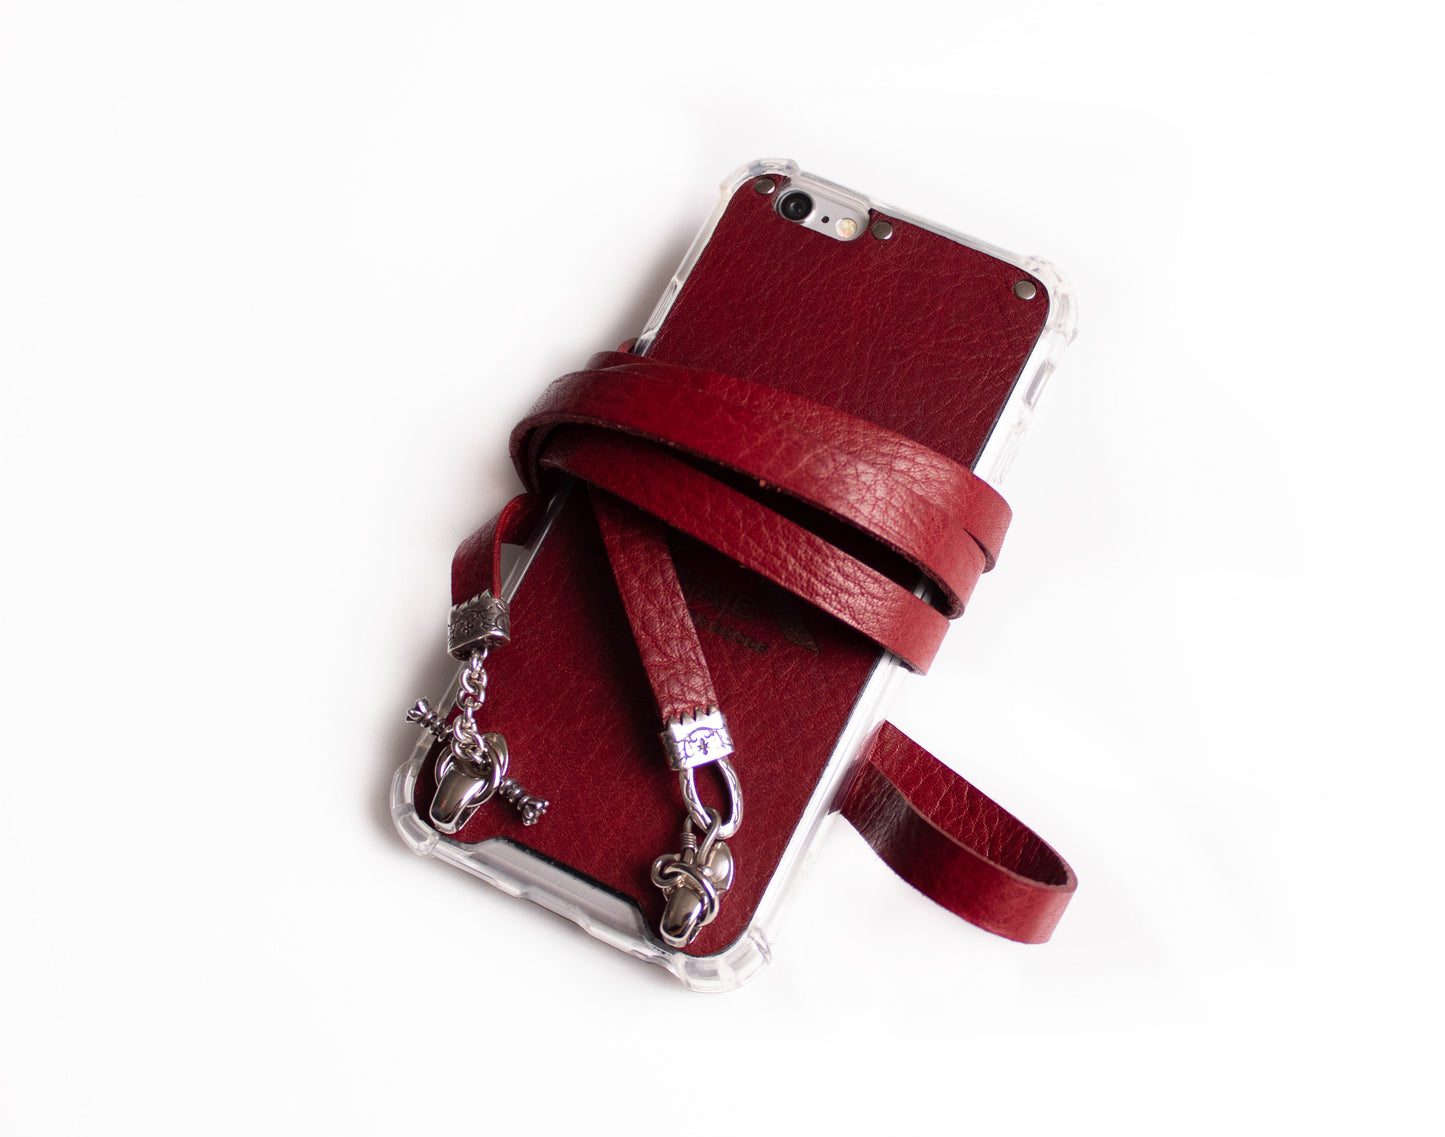 Full-Grain Genuine vegetable-tanned Leather & 925 Sterling Silver Case for iPhone. Double Full-Grain Genuine vegetable-tanned Leather Bracelet/Crossbody/Necklace, Blue, Brown, Black, or Red.- F05